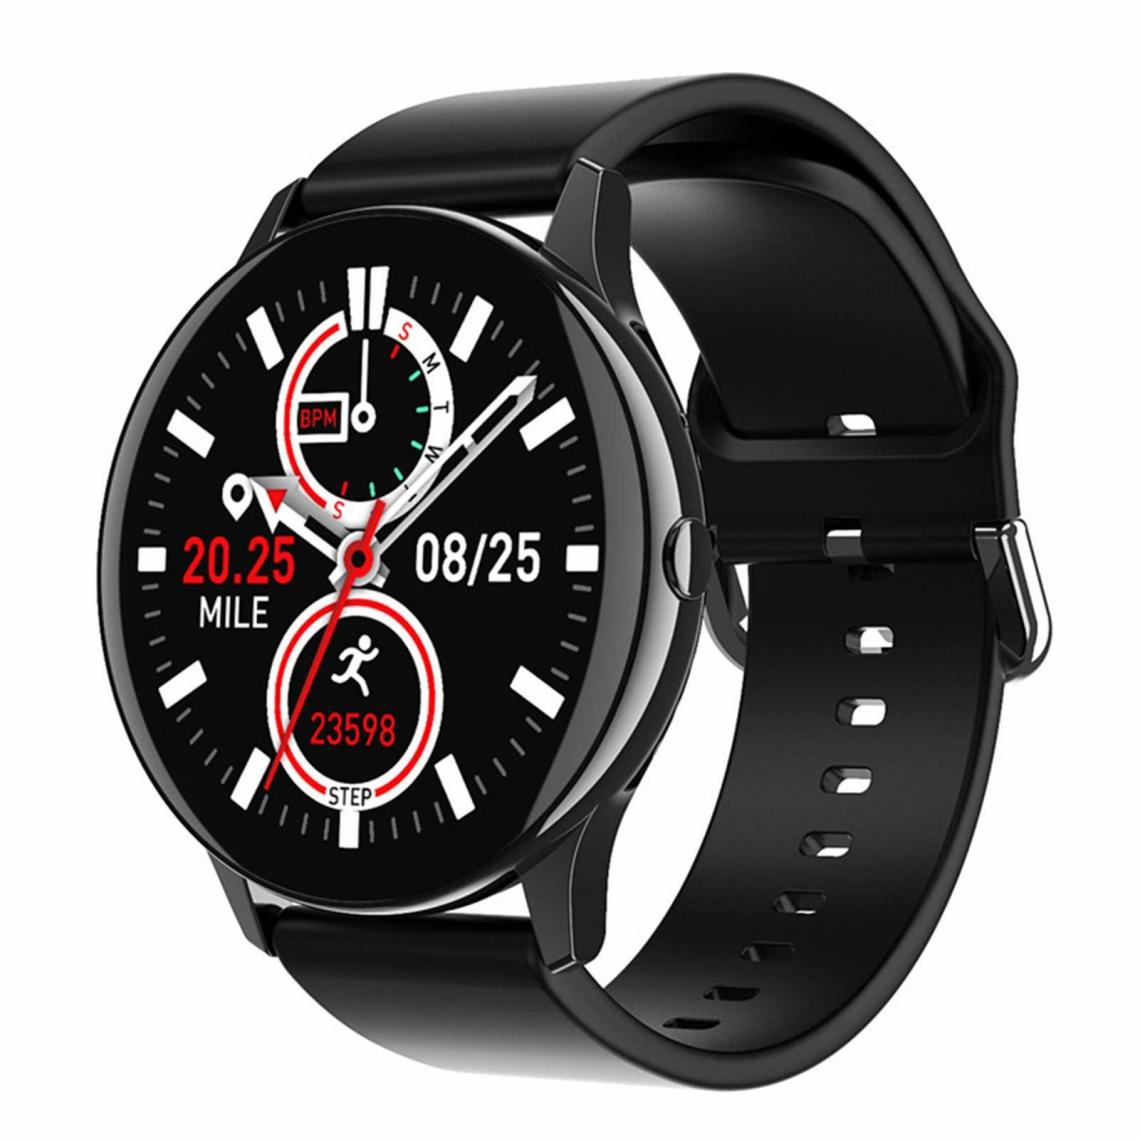 Chronotech Montres - Smart Watches 1.28 Touch Screen Smartwatches IP67 Waterproof Fitness Tackers Bluetooth SmartwatchSleep Heart Rate Calorie Monitor Activity Tracker Wristband(black) - Montre connectée